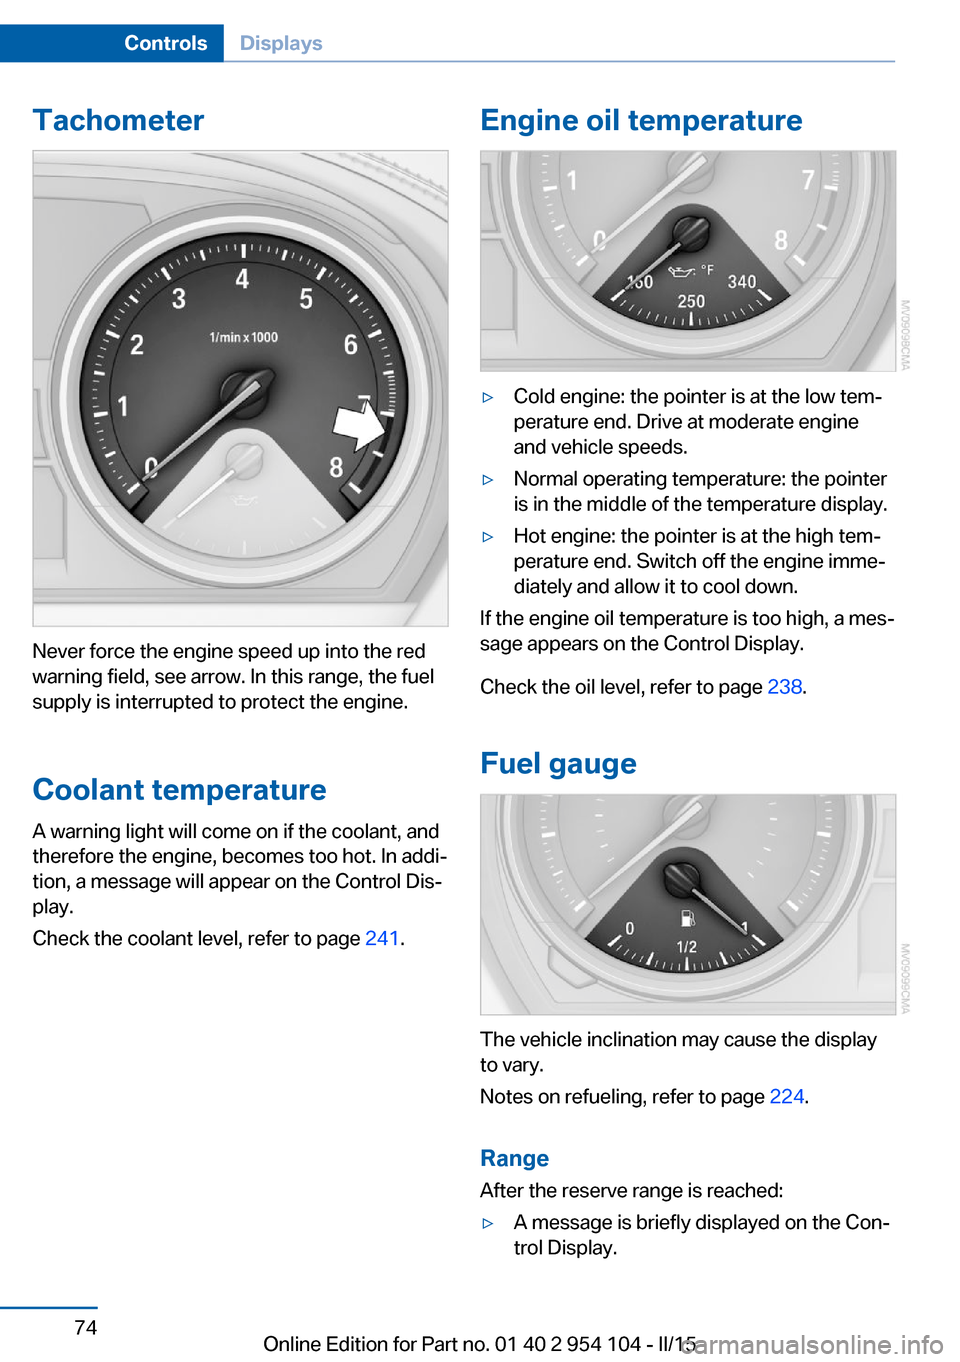 BMW Z4 2015 E89 Owners Manual Tachometer
Never force the engine speed up into the red
warning field, see arrow. In this range, the fuel
supply is interrupted to protect the engine.
Coolant temperature A warning light will come on 